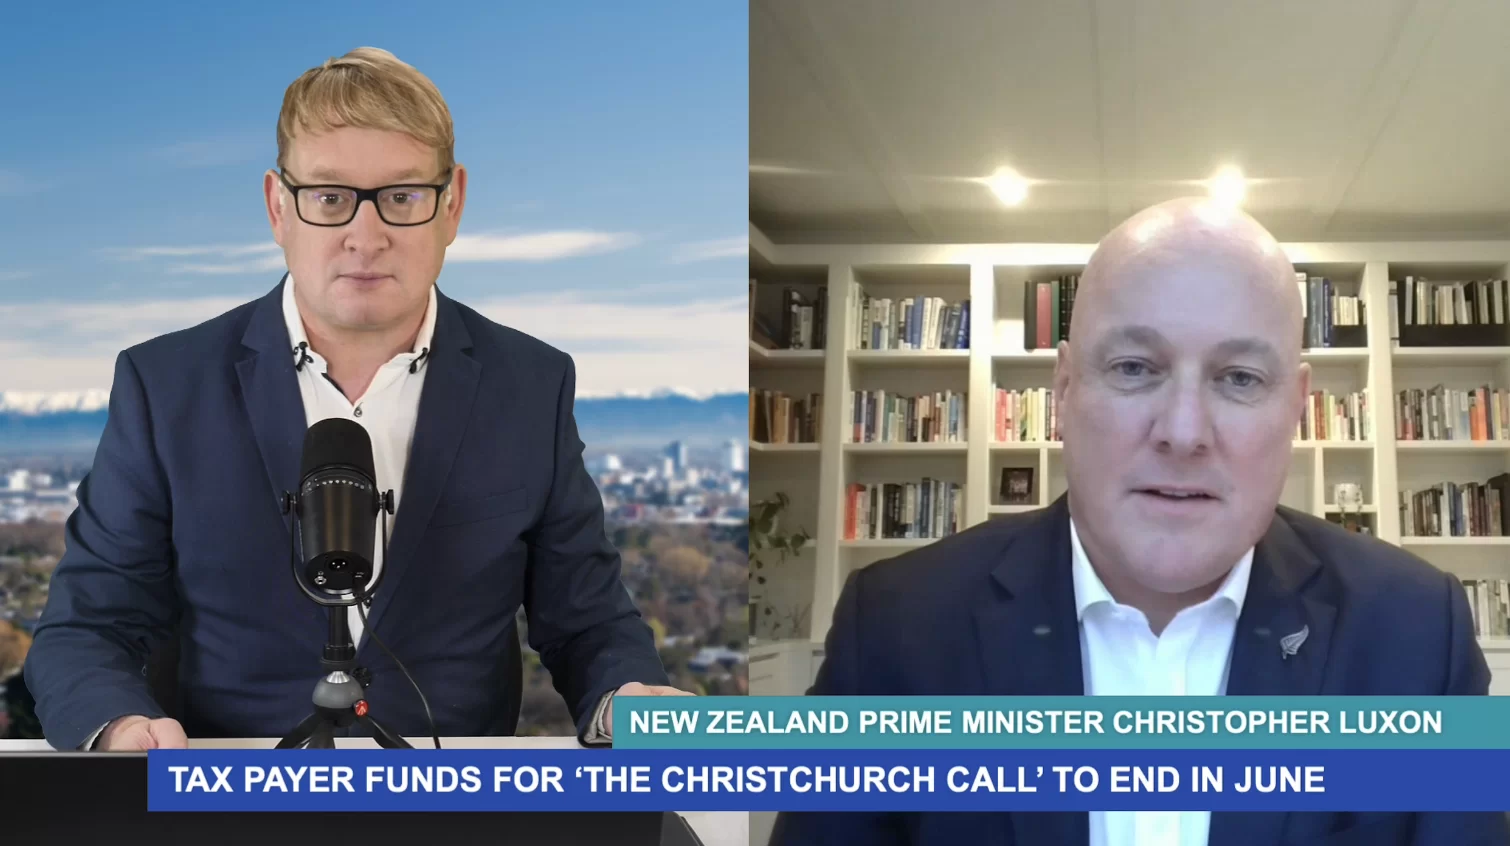 Prime Minister Christopher Luxon on the end of public funding for the ‘Christchurch Call